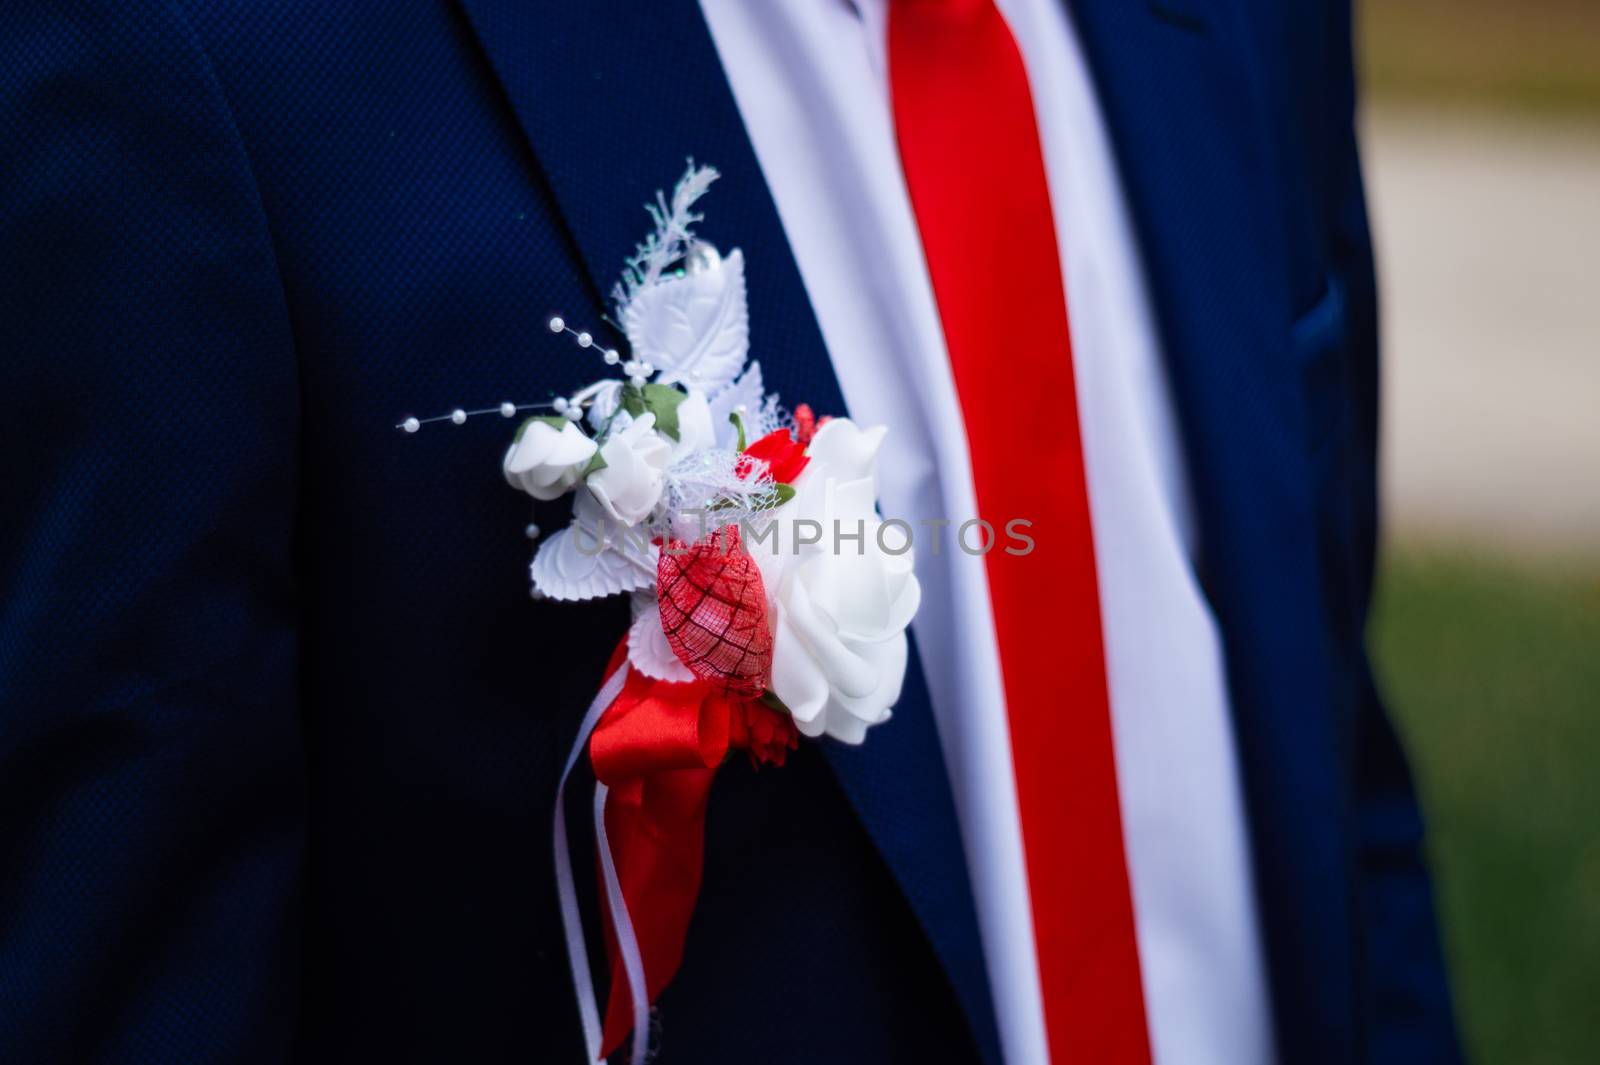 Groom's suit with a flower on his chest. Wedding details in close-up view.